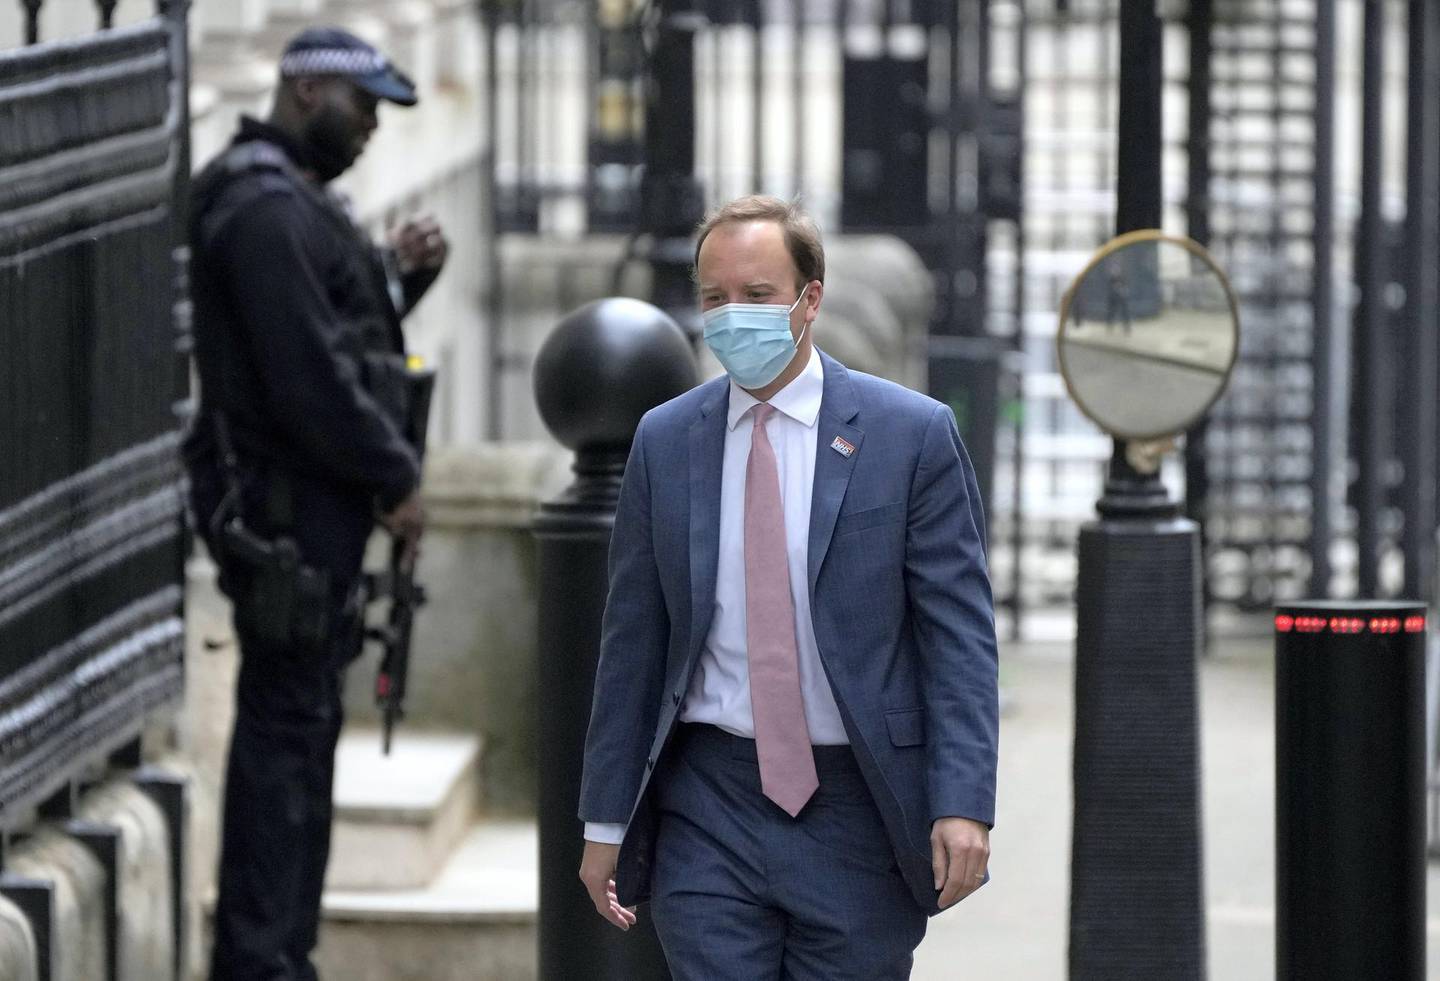 Britain's Health Secretary Matt Hancock arrives at Downing Street in London, Wednesday, May 26, 2021. U.K. Prime Minister Boris Johnson's former chief aide lashed out at the government he once served, saying people died "in horrific circumstances" because of authorities' failed response to the coronavirus pandemic. Cummings made a blistering attack Wednesday, May 26, 2021 on the government he once worked for, saying some ministers and officials went on vacation as the pandemic swept towards the U.K. in February 2020. He told lawmakers investigating Britain's coronavirus response that the government "was not operating on a war footing" and "lots of people were literally skiing." (AP Photo/Frank Augstein)